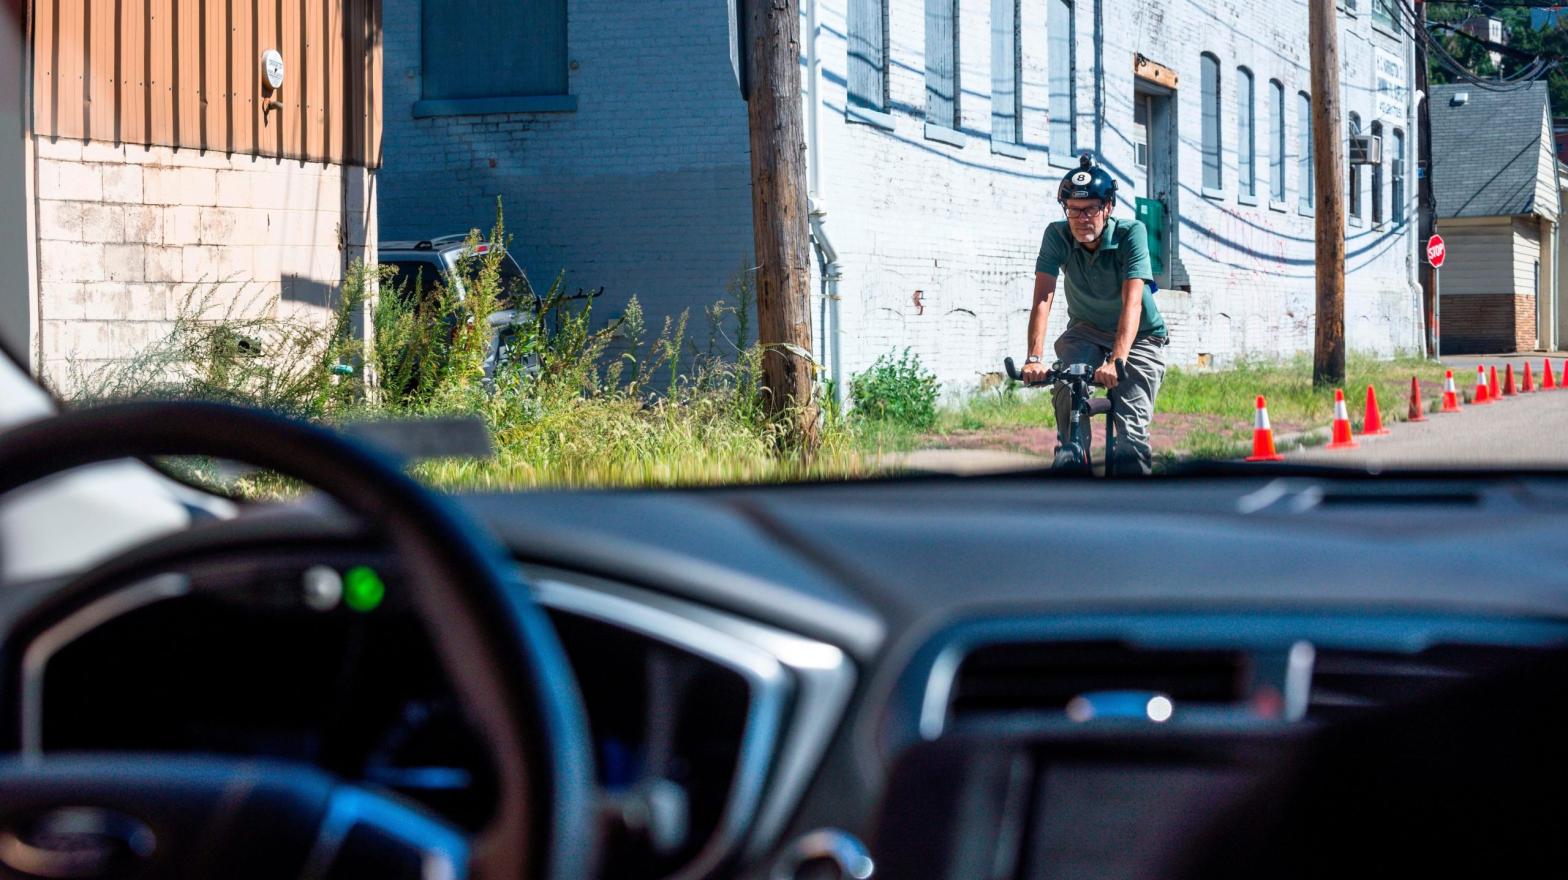 A bicyclist riding past an Uber self-driving car during a road test in Pittsburgh, Pennsylvania in 2016. (Photo: Angelo Merendino / AFP, Getty Images)